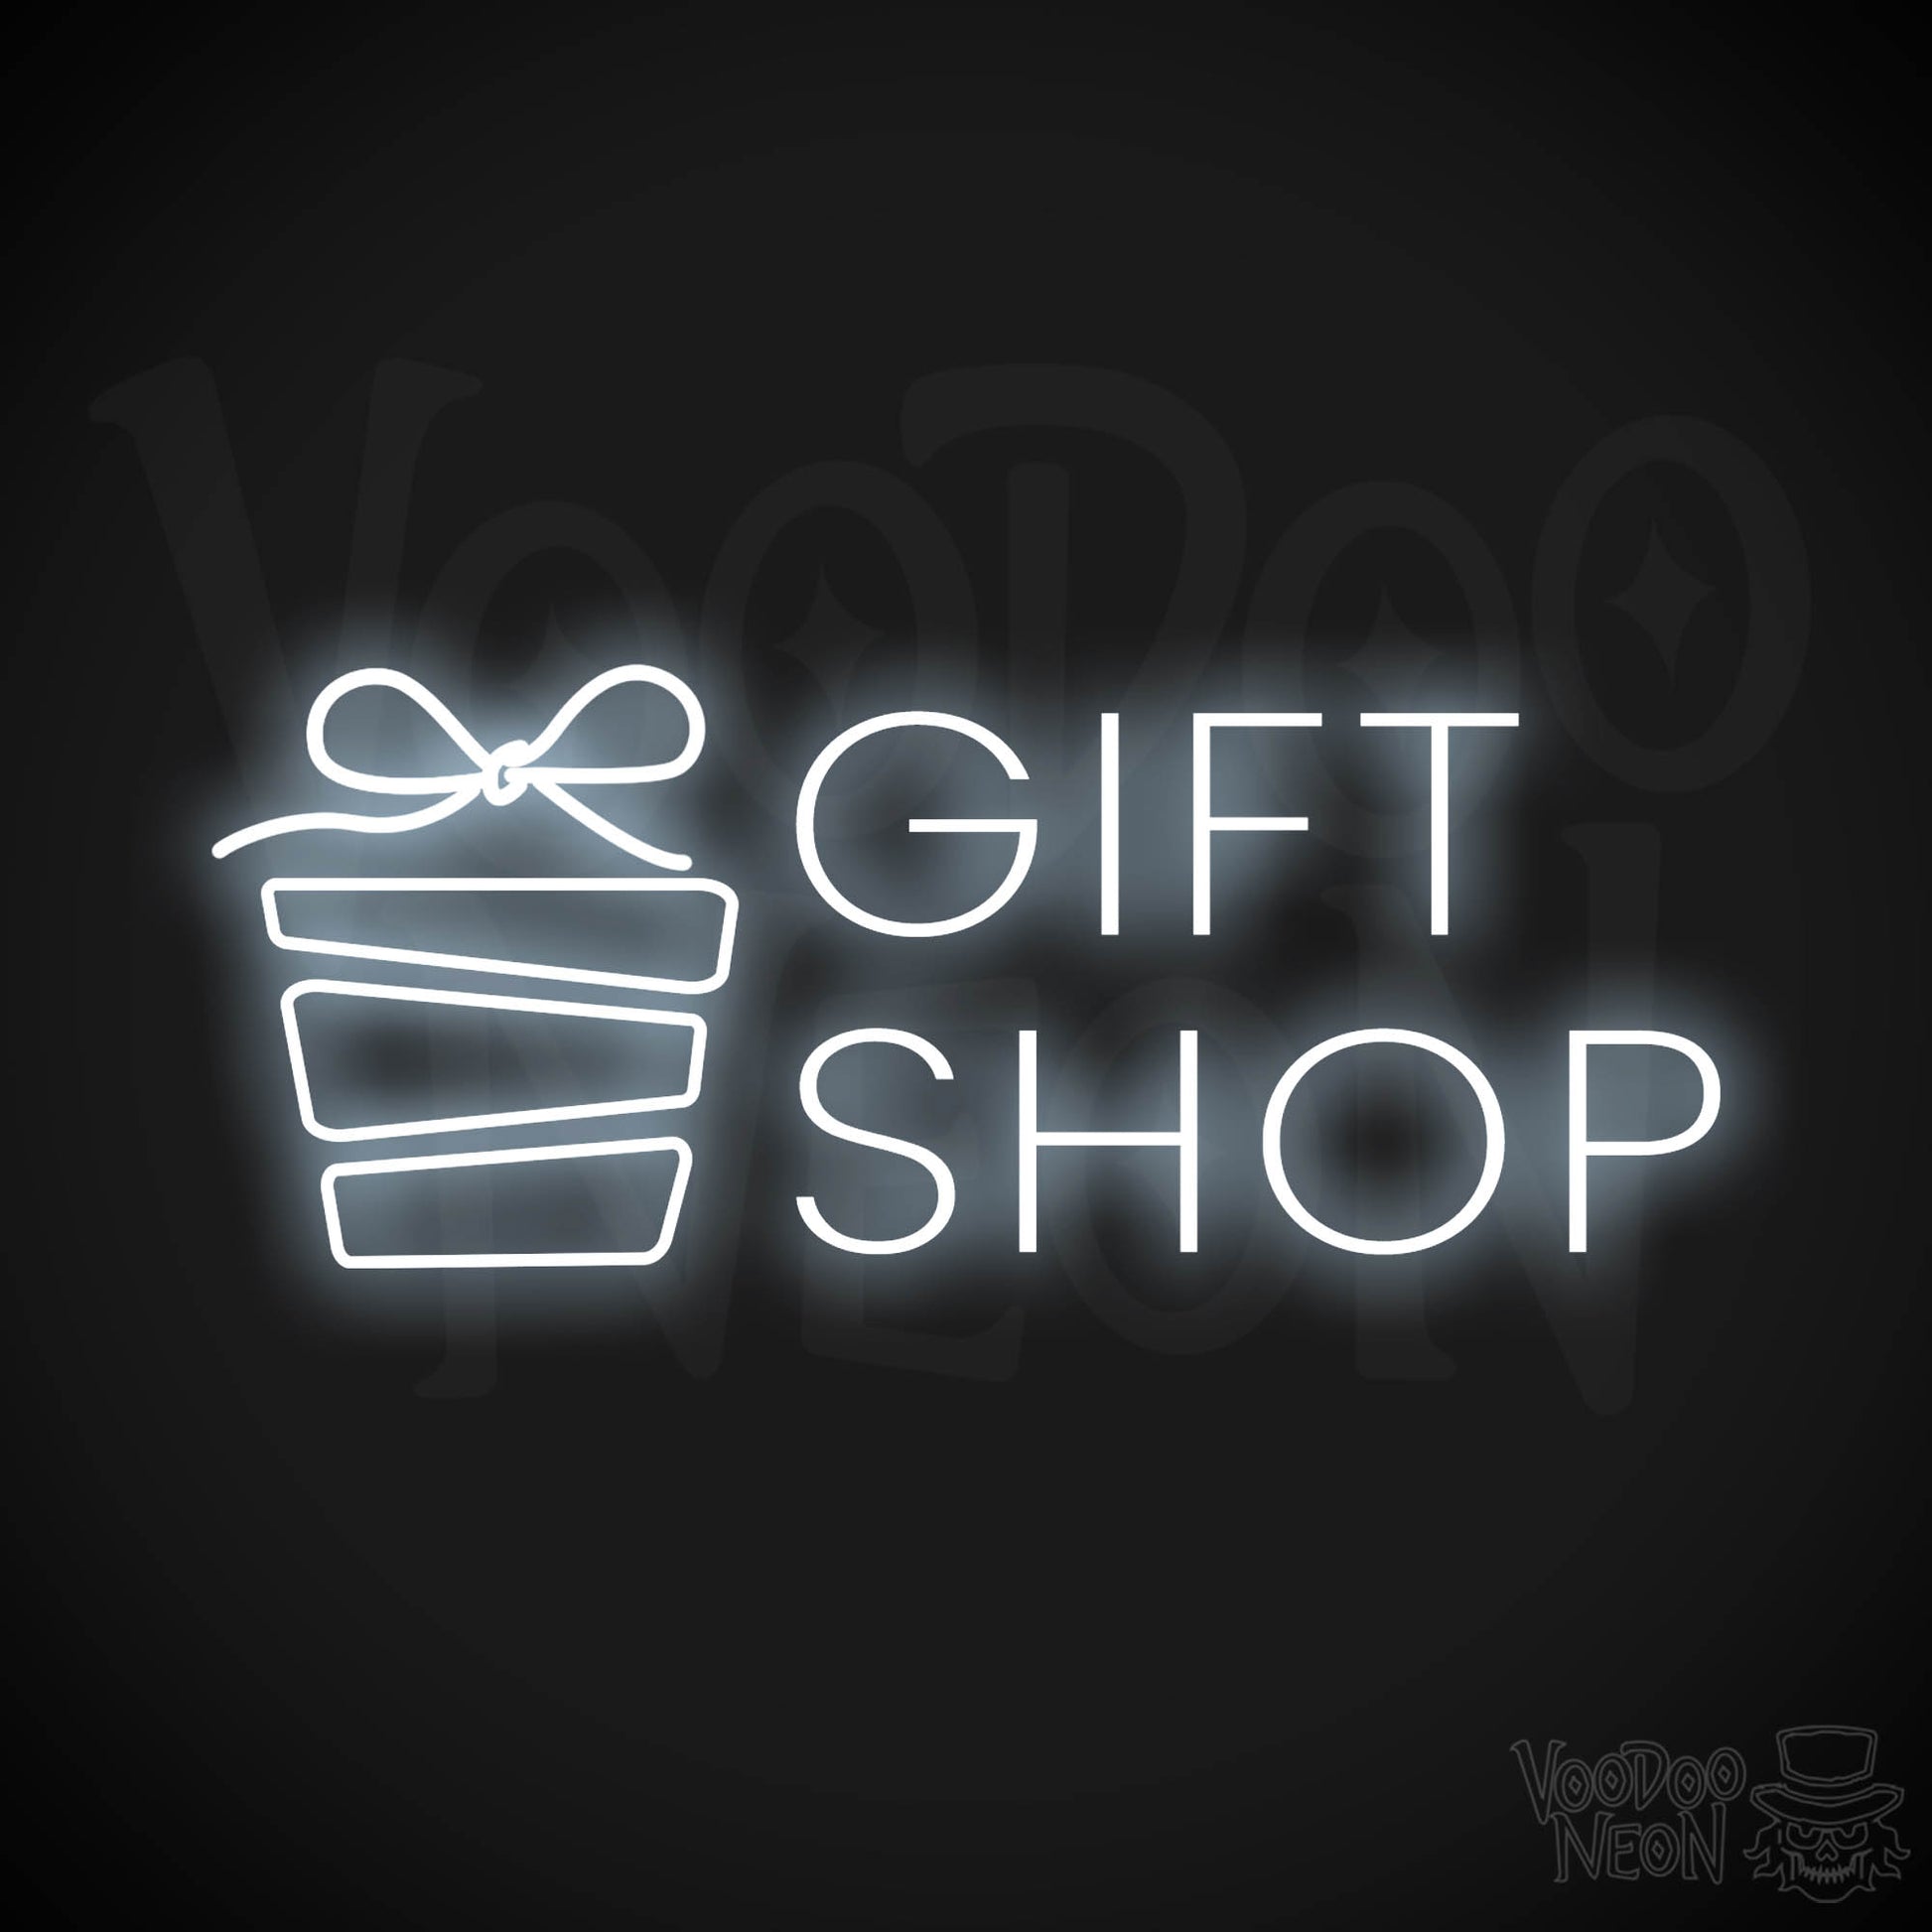 Gift Shop LED Neon - Cool White